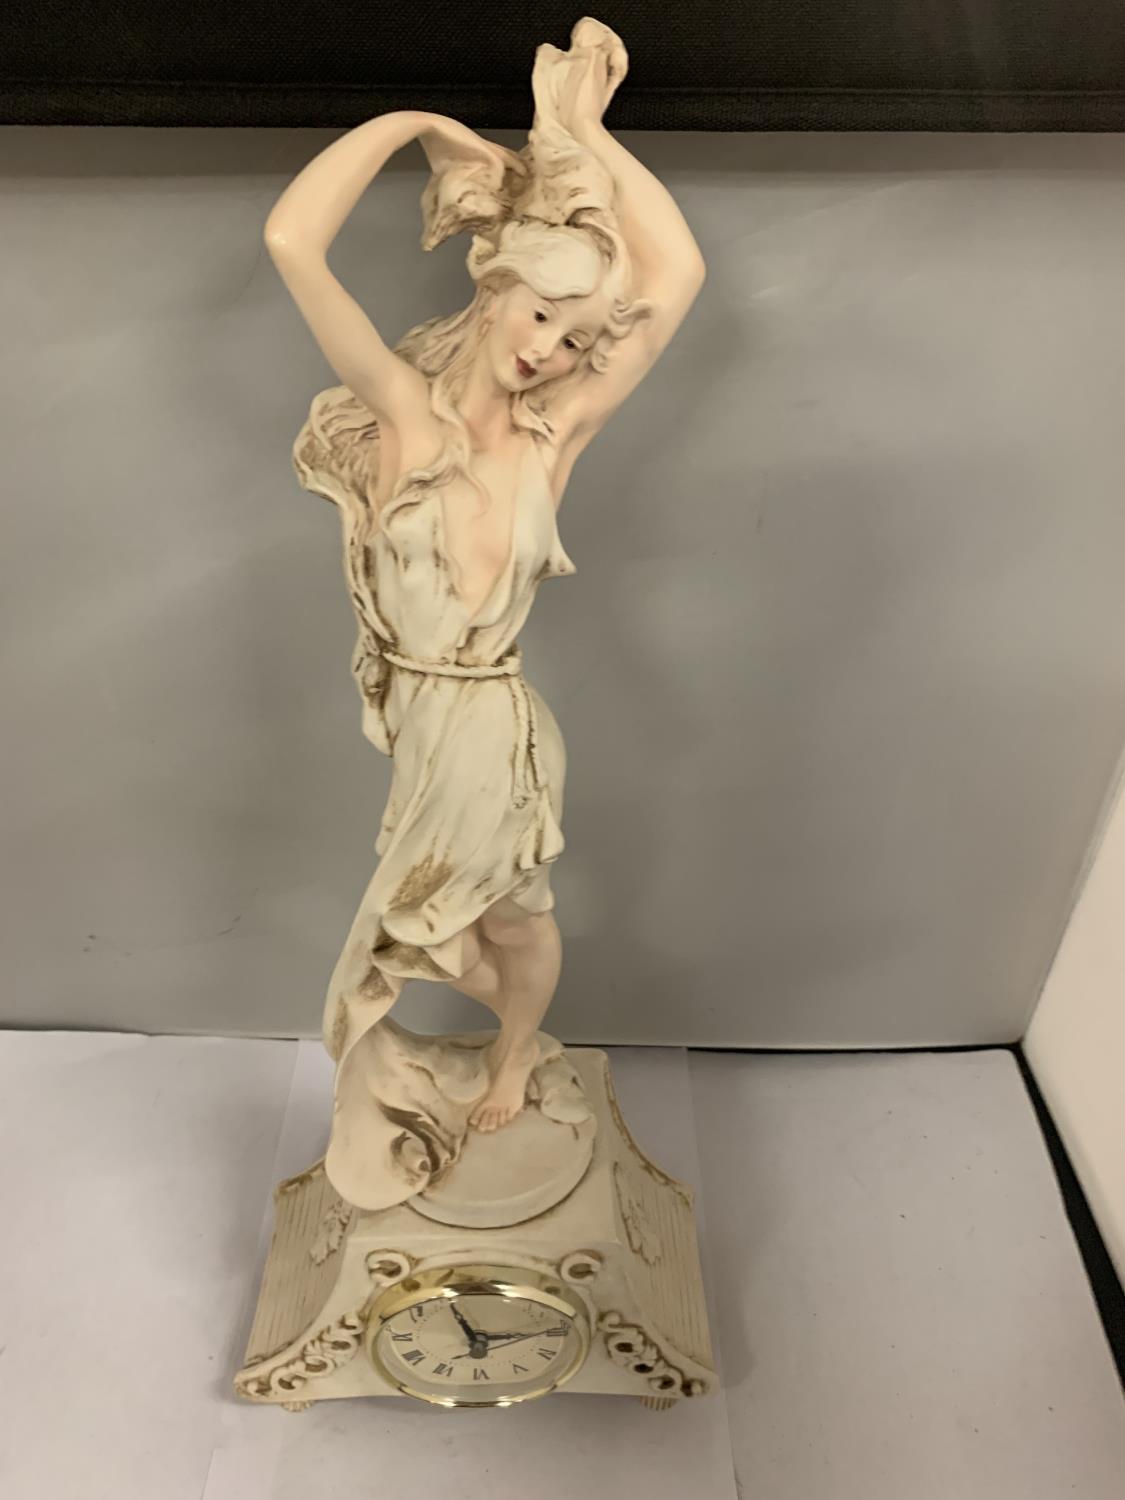 A VINTAGE STYLE CLOCK ORNAMENT WITH AN ART DECO LADY H : APPROX 52 CM